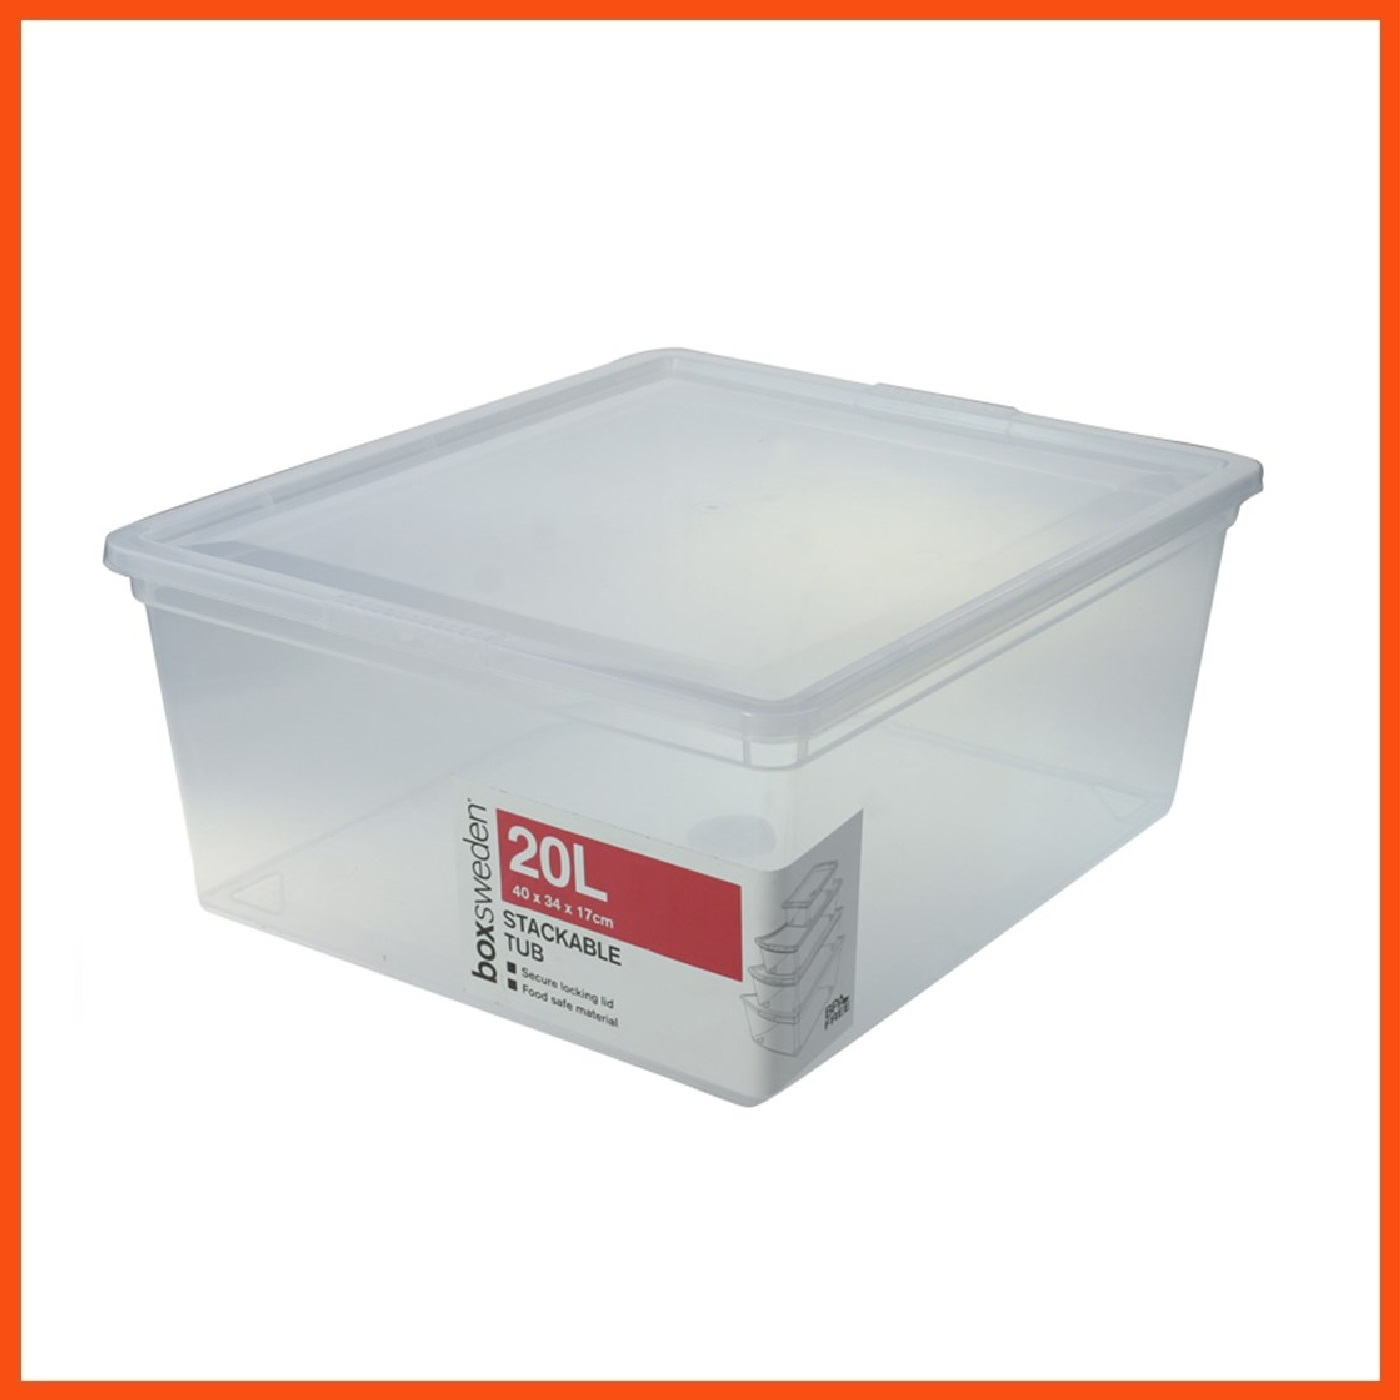 Details About 12 X 20l Stackable Plastic Storage Boxes With Lid Storage Containers Tubs Bins inside measurements 1400 X 1400